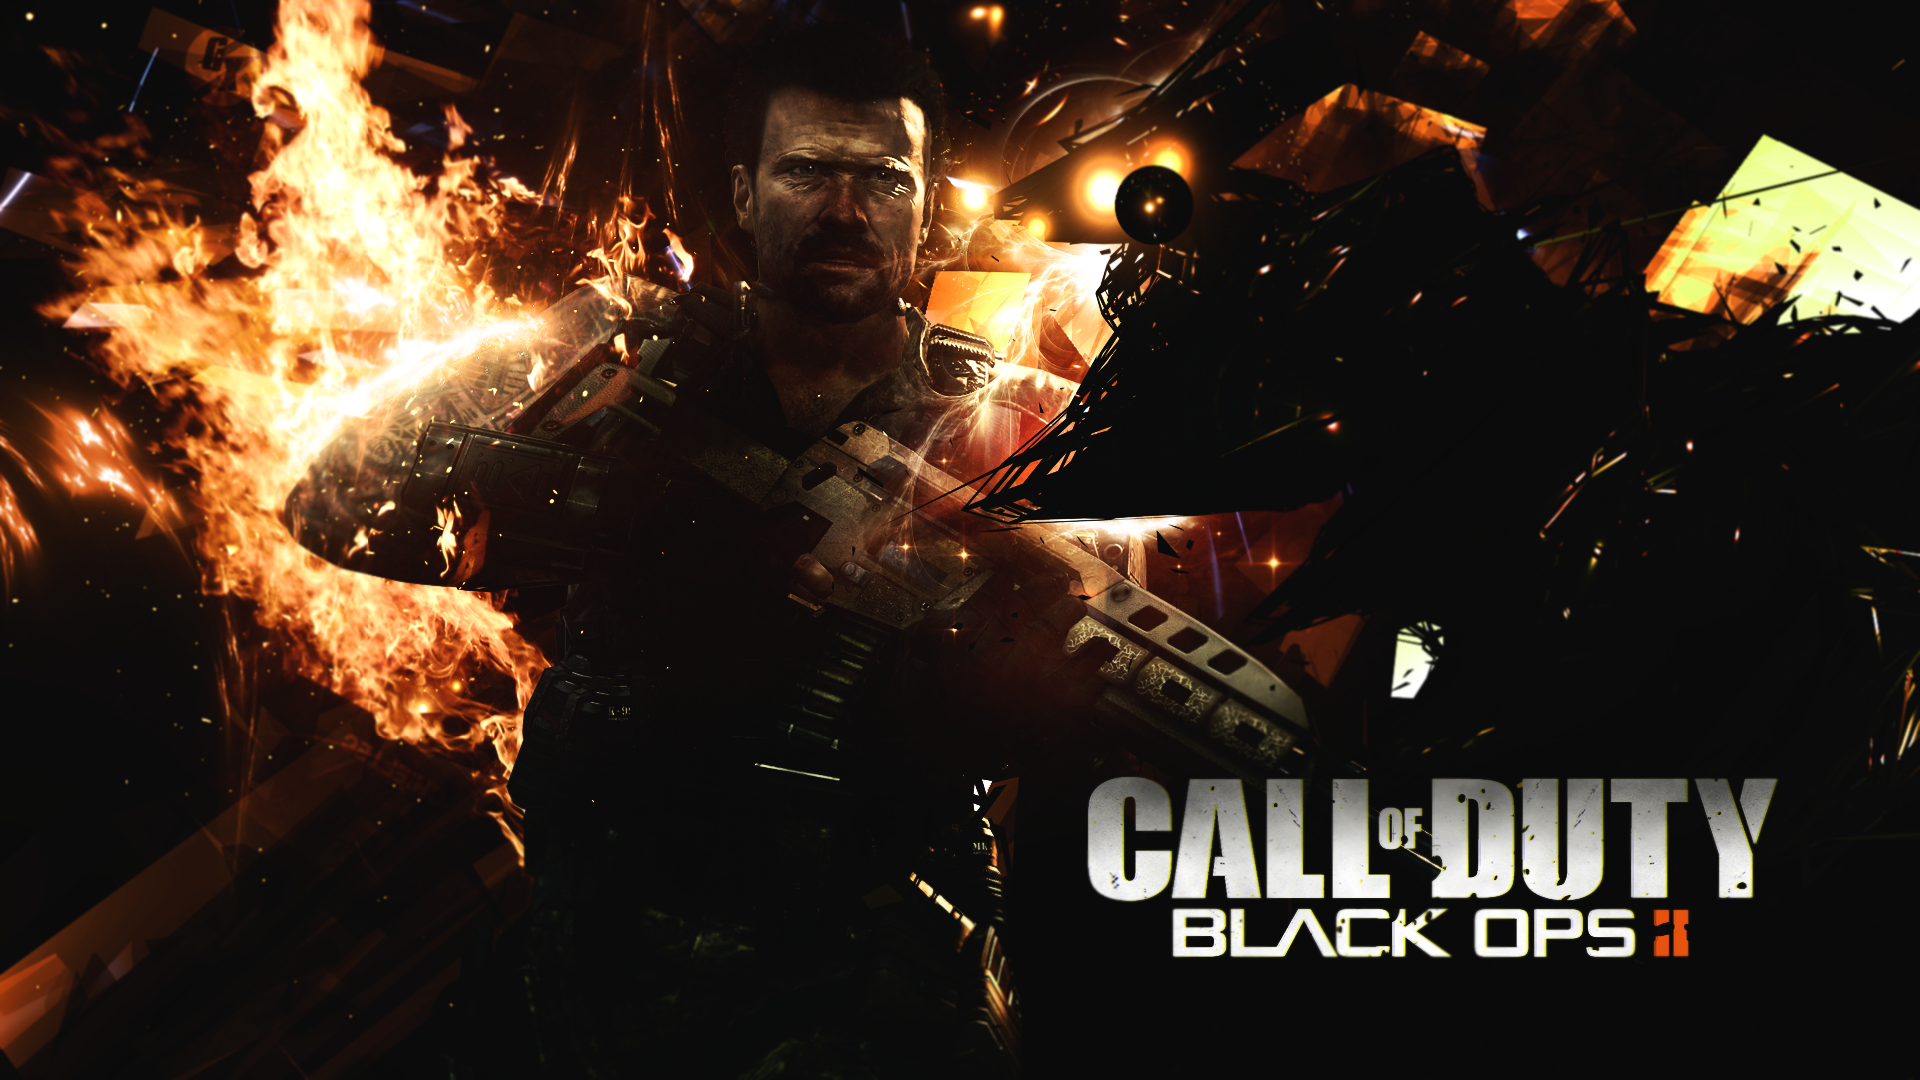 HD Black Ops Backgrounds